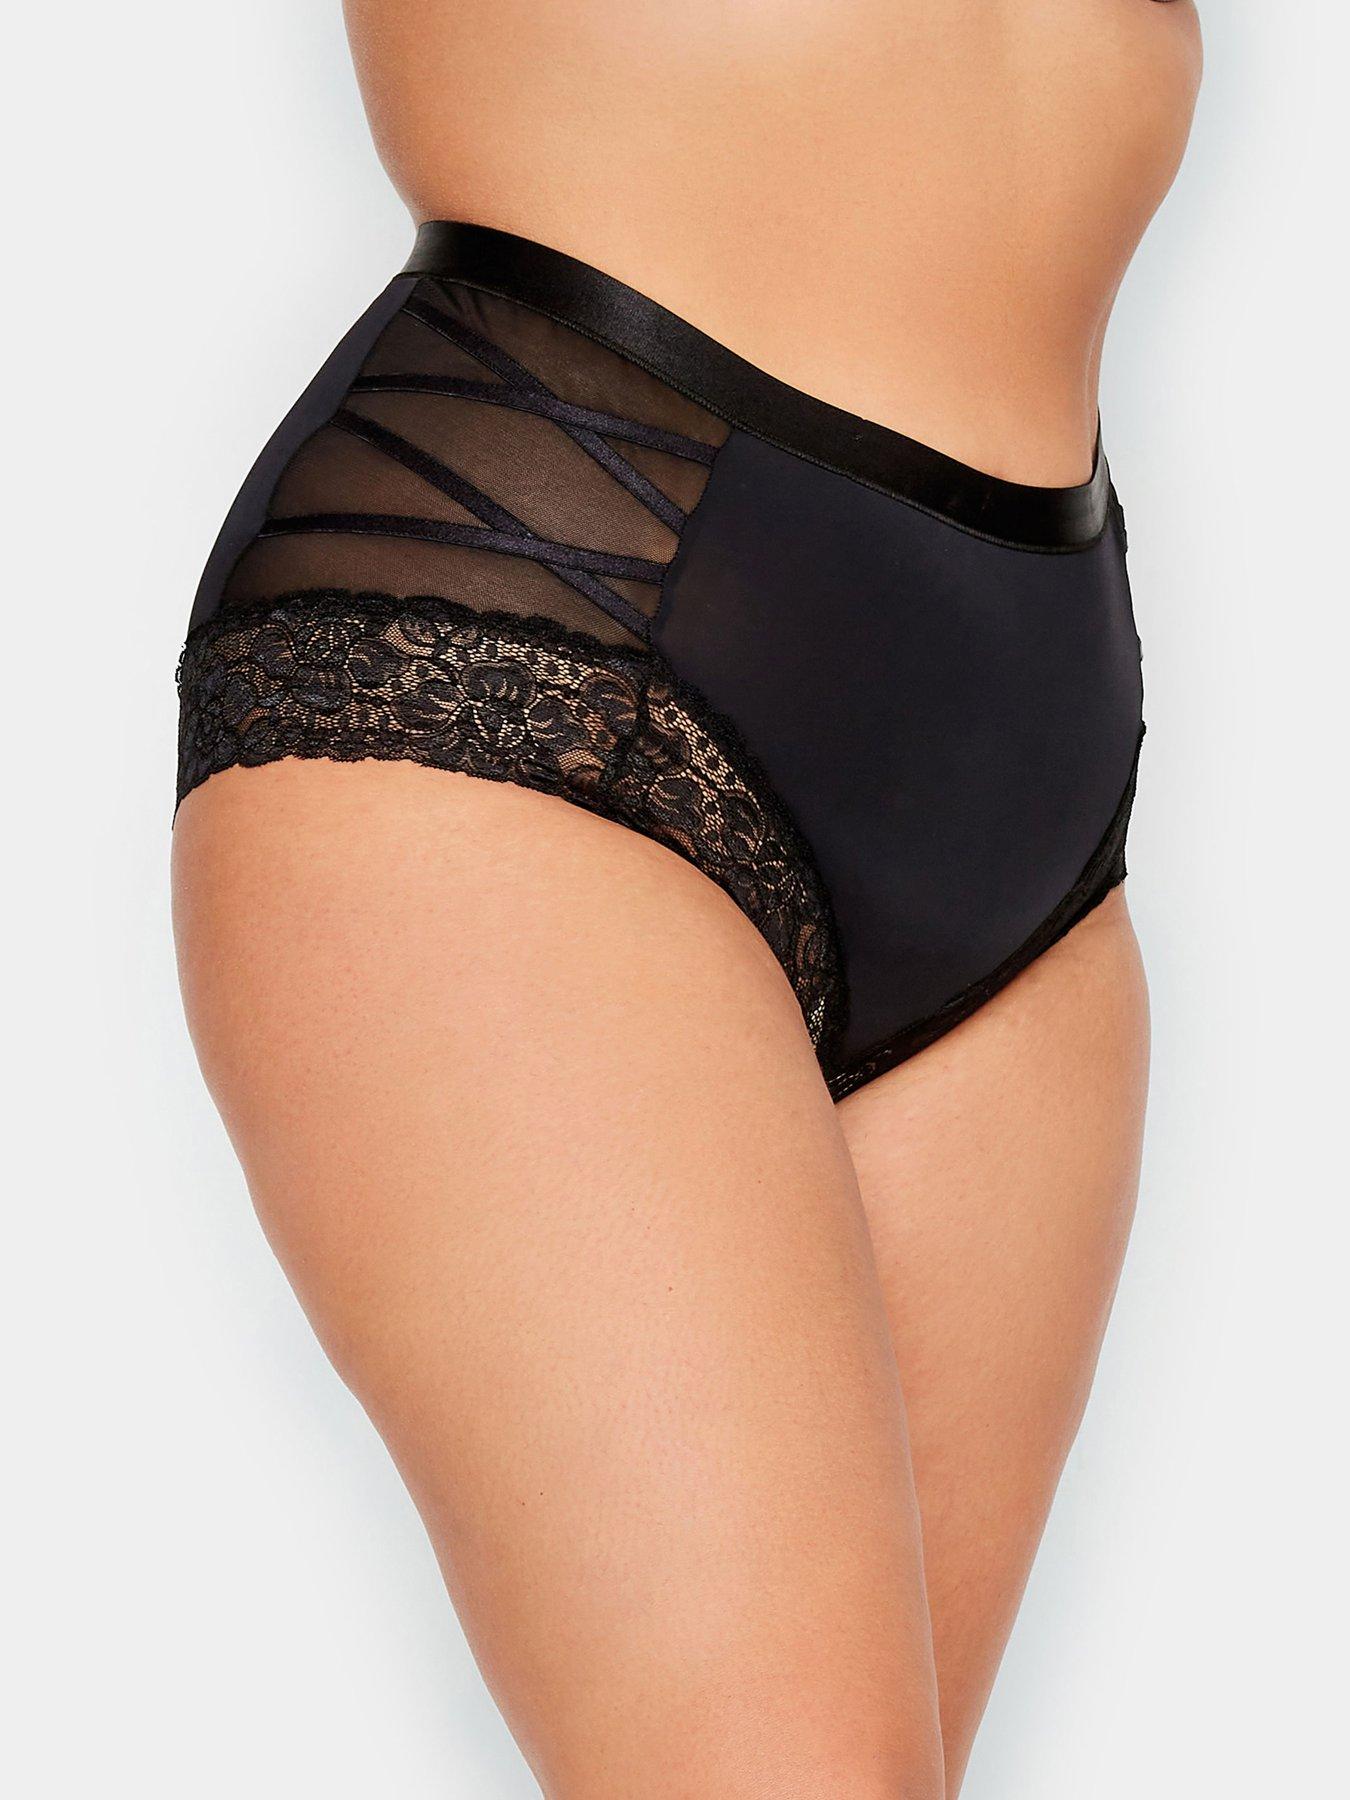 Definitions Shaping Control Thong, Pour Moi, Definitions Shaping Control  Thong, Black